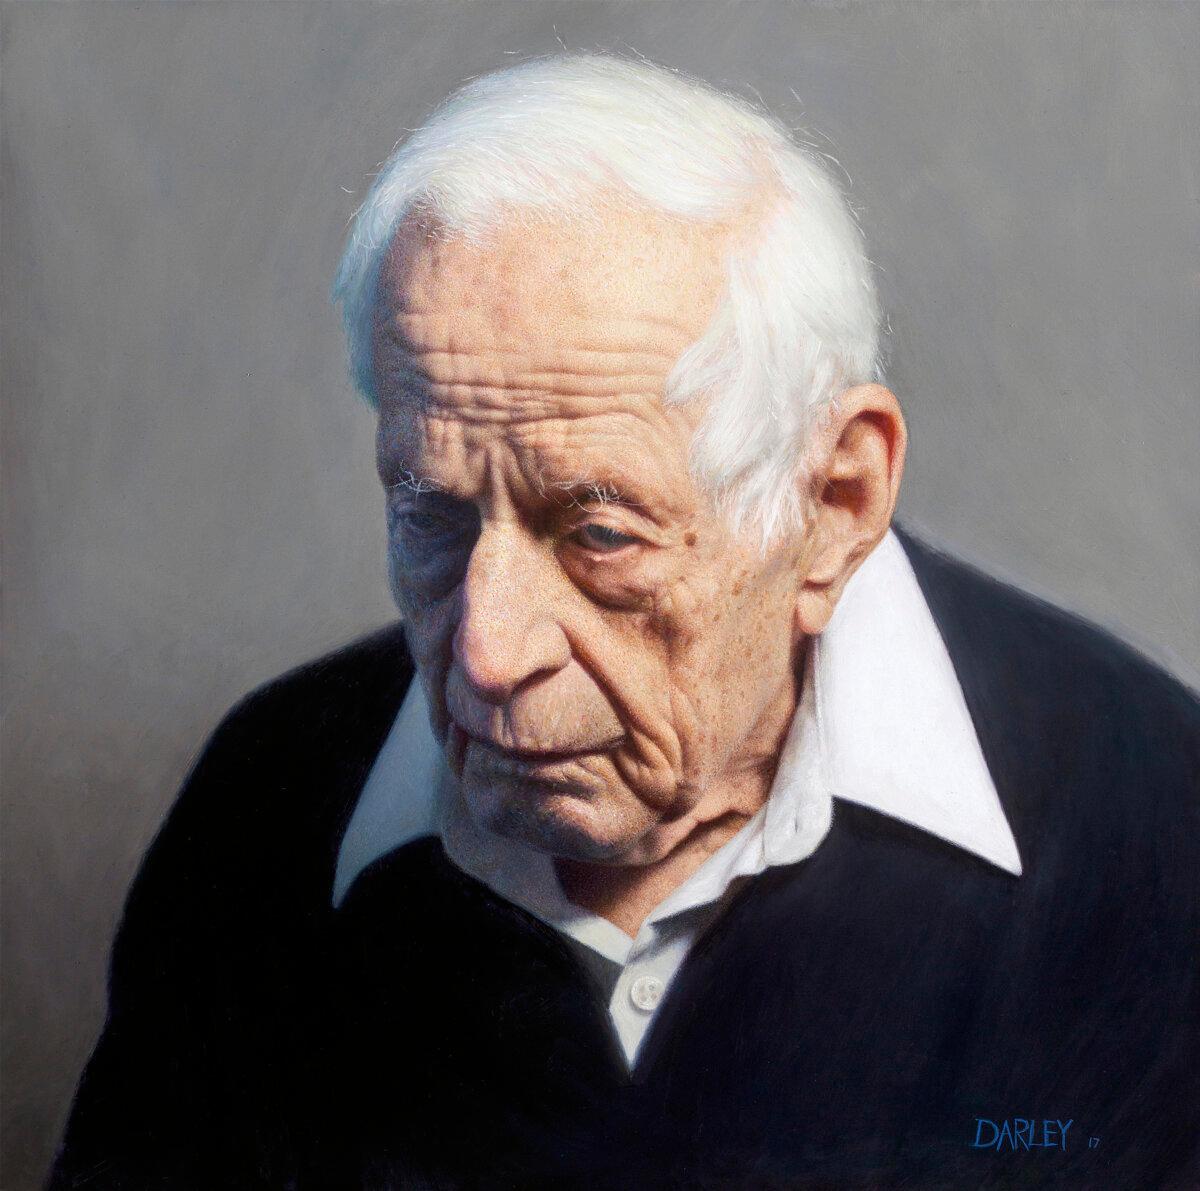 John Darley painted his grandfather, who had recently lost his wife of 86 years. “Grandfather," oil on linen; 16 inches by 16 inches. (Courtesy of John Darley)